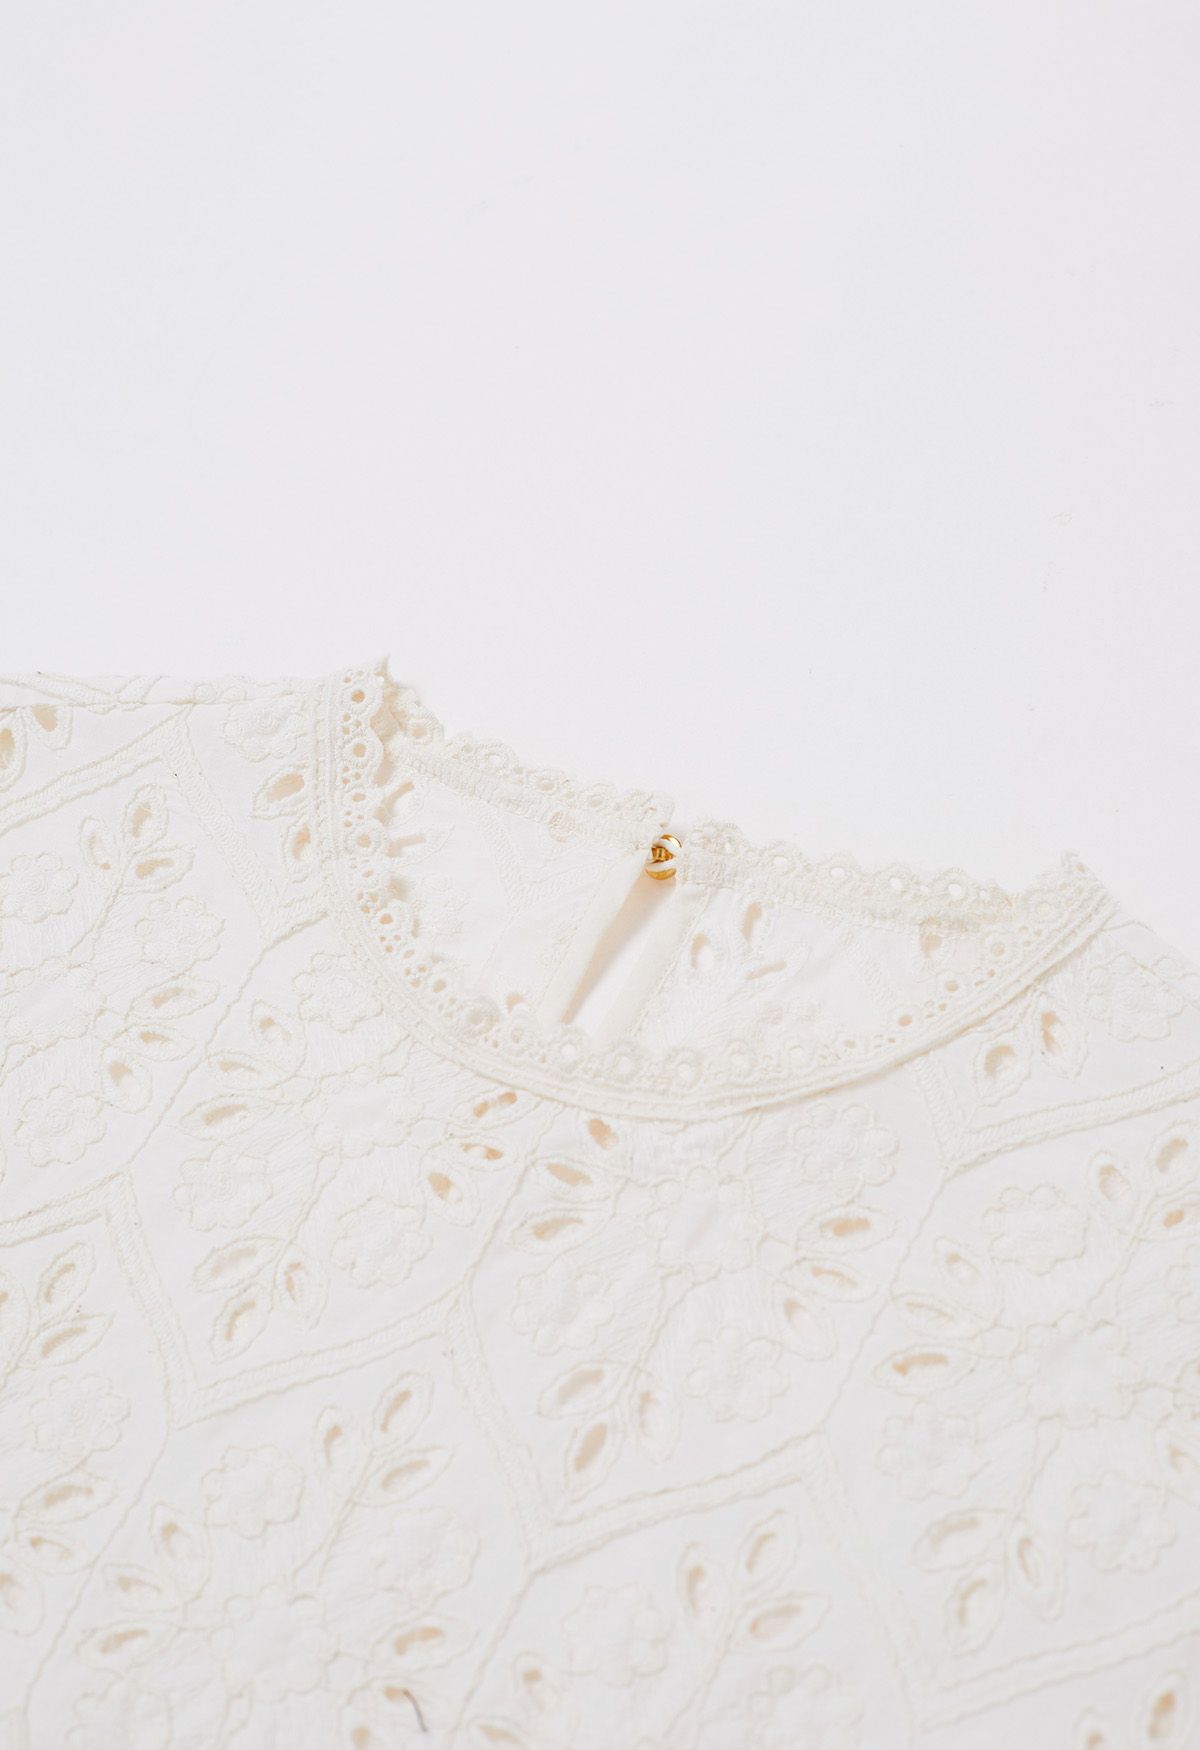 Floral Embroidered Eyelet Dolly Top in Cream